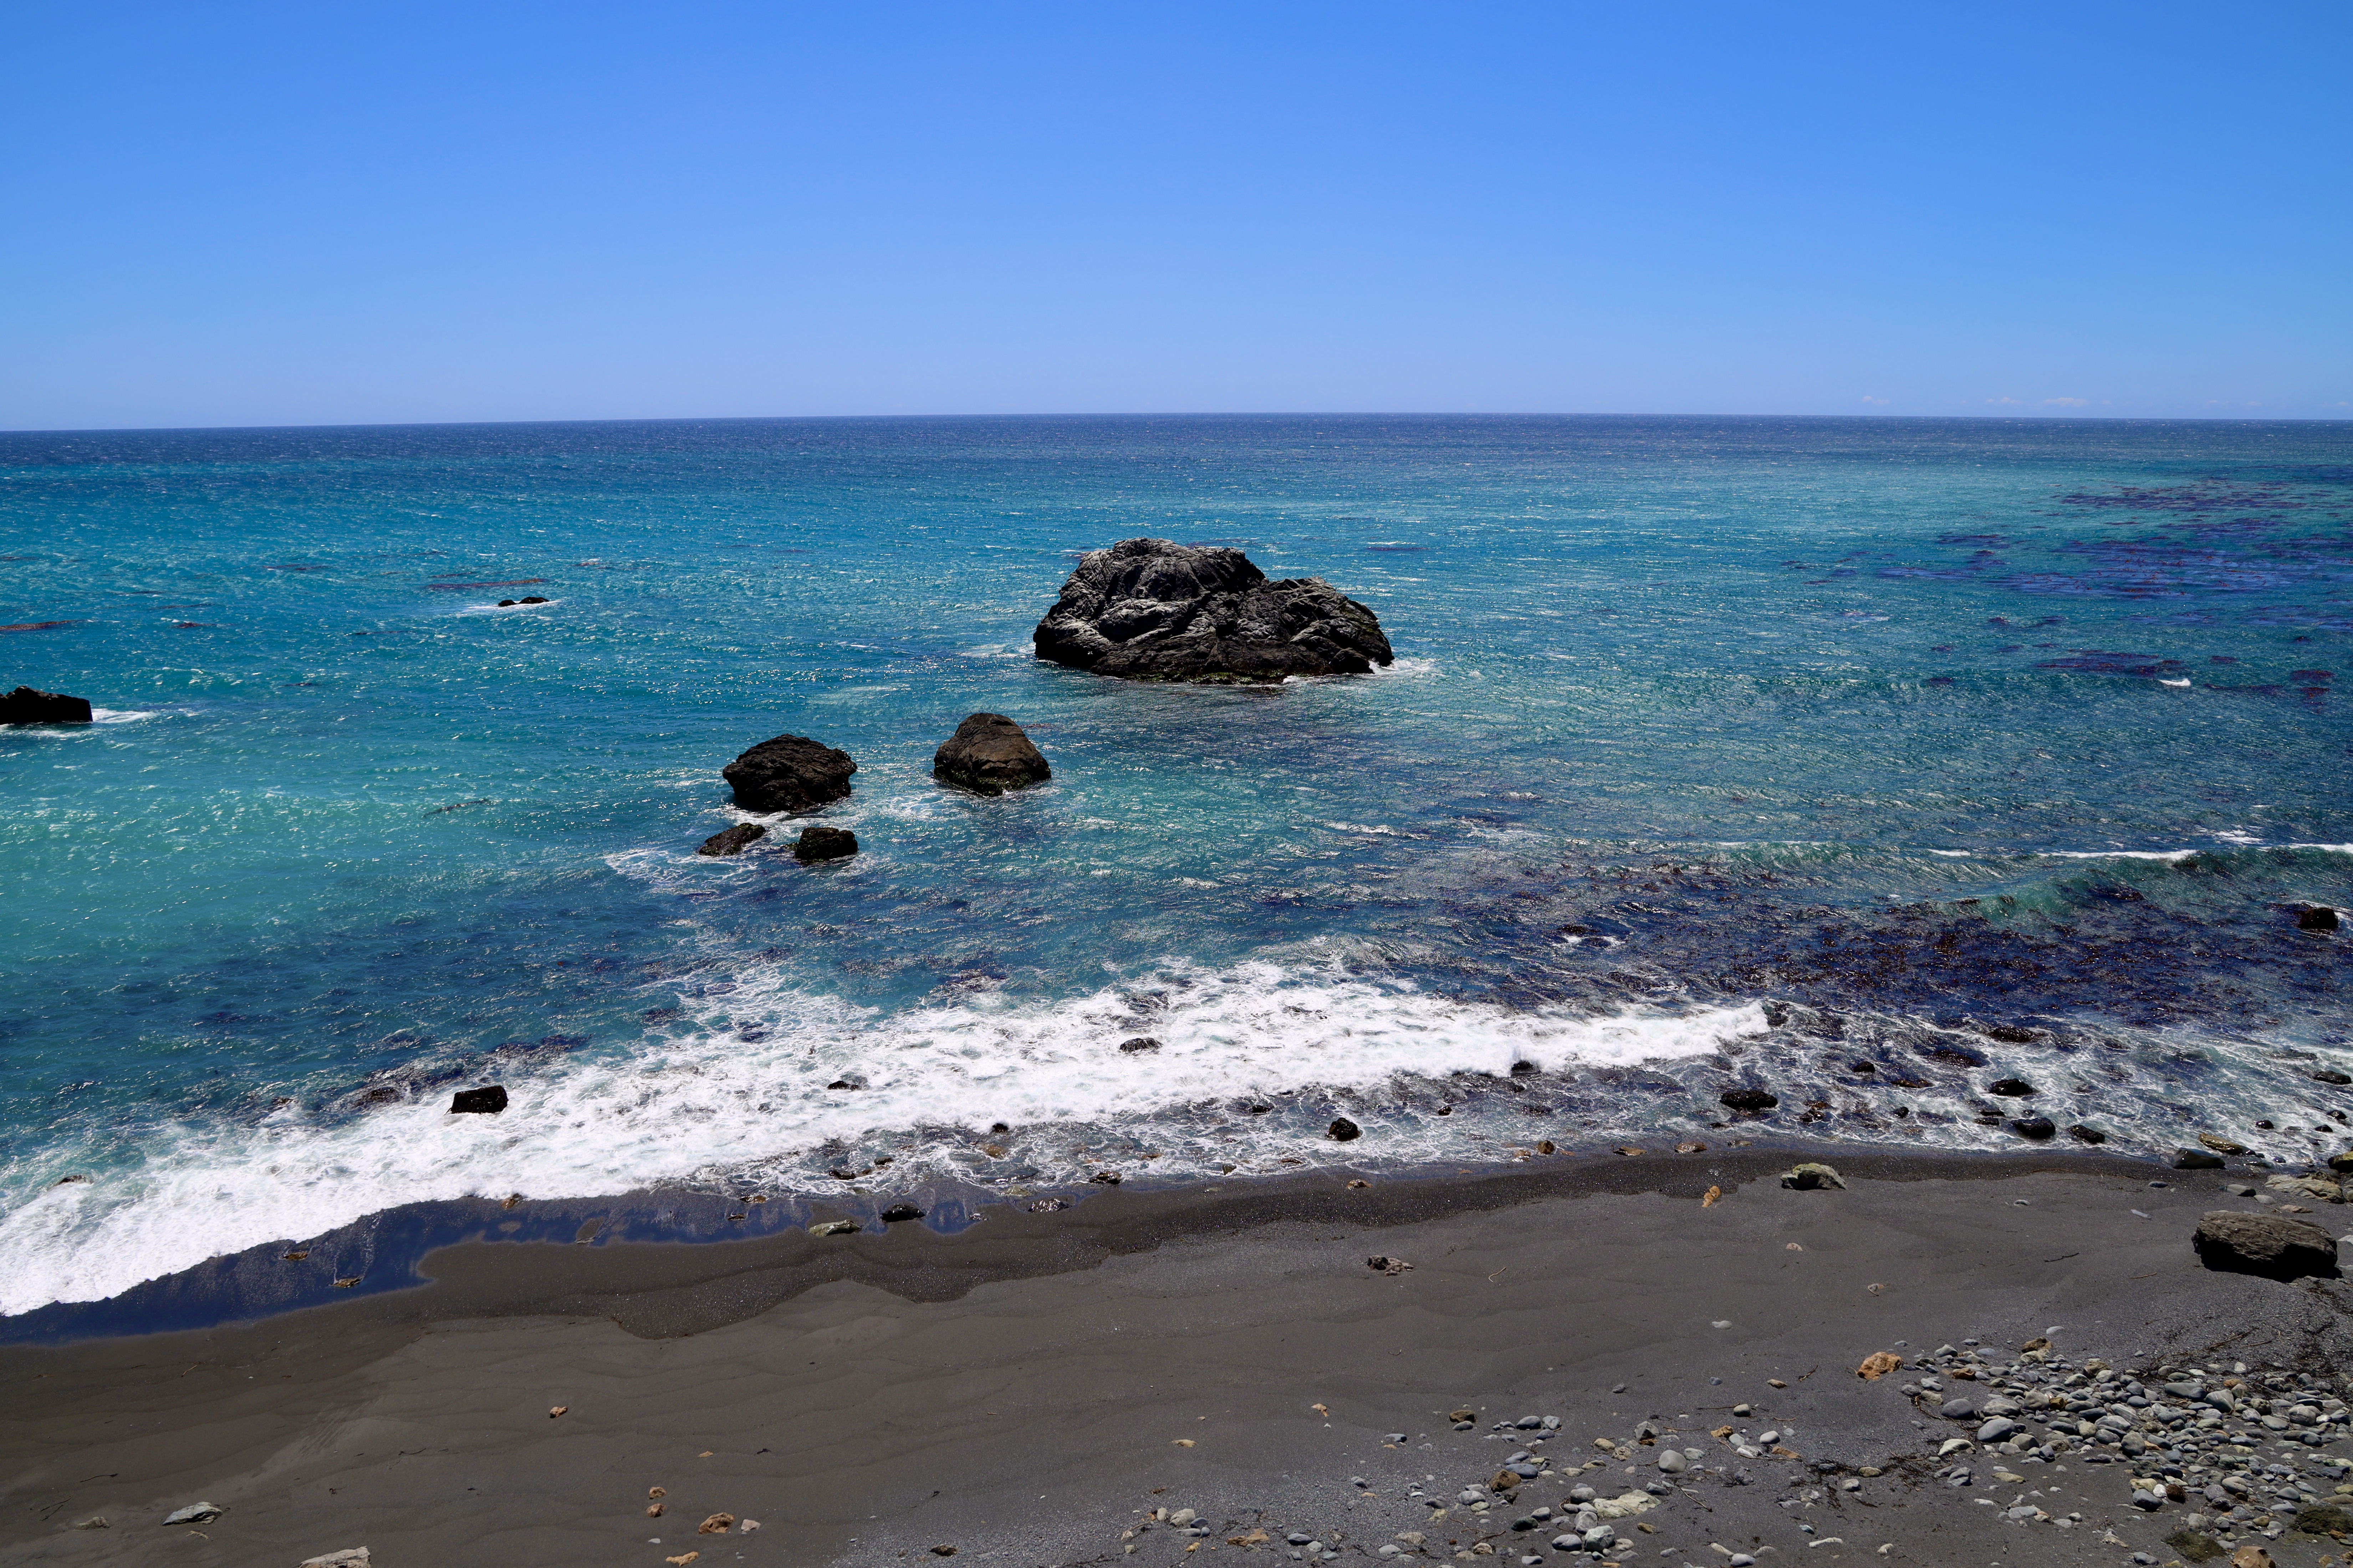 A beach with rocks and water in the ocean.